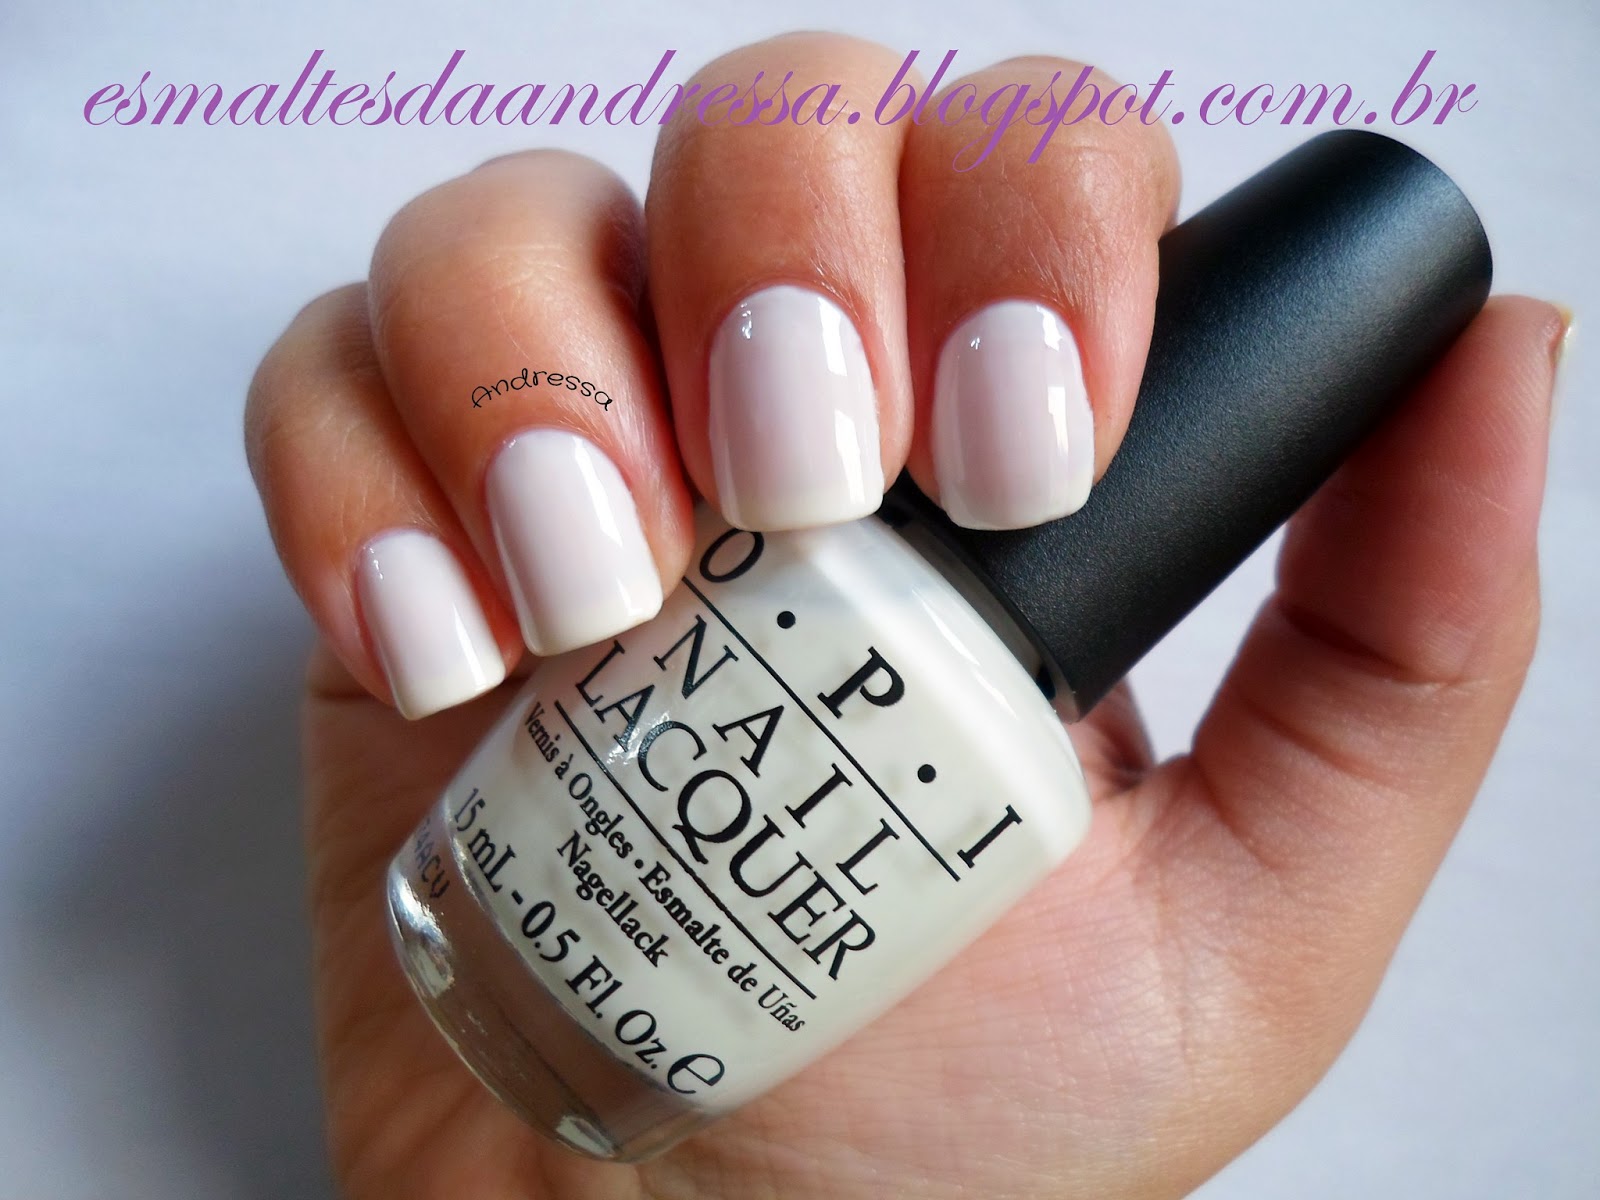 6. OPI GelColor in "Funny Bunny" - wide 1